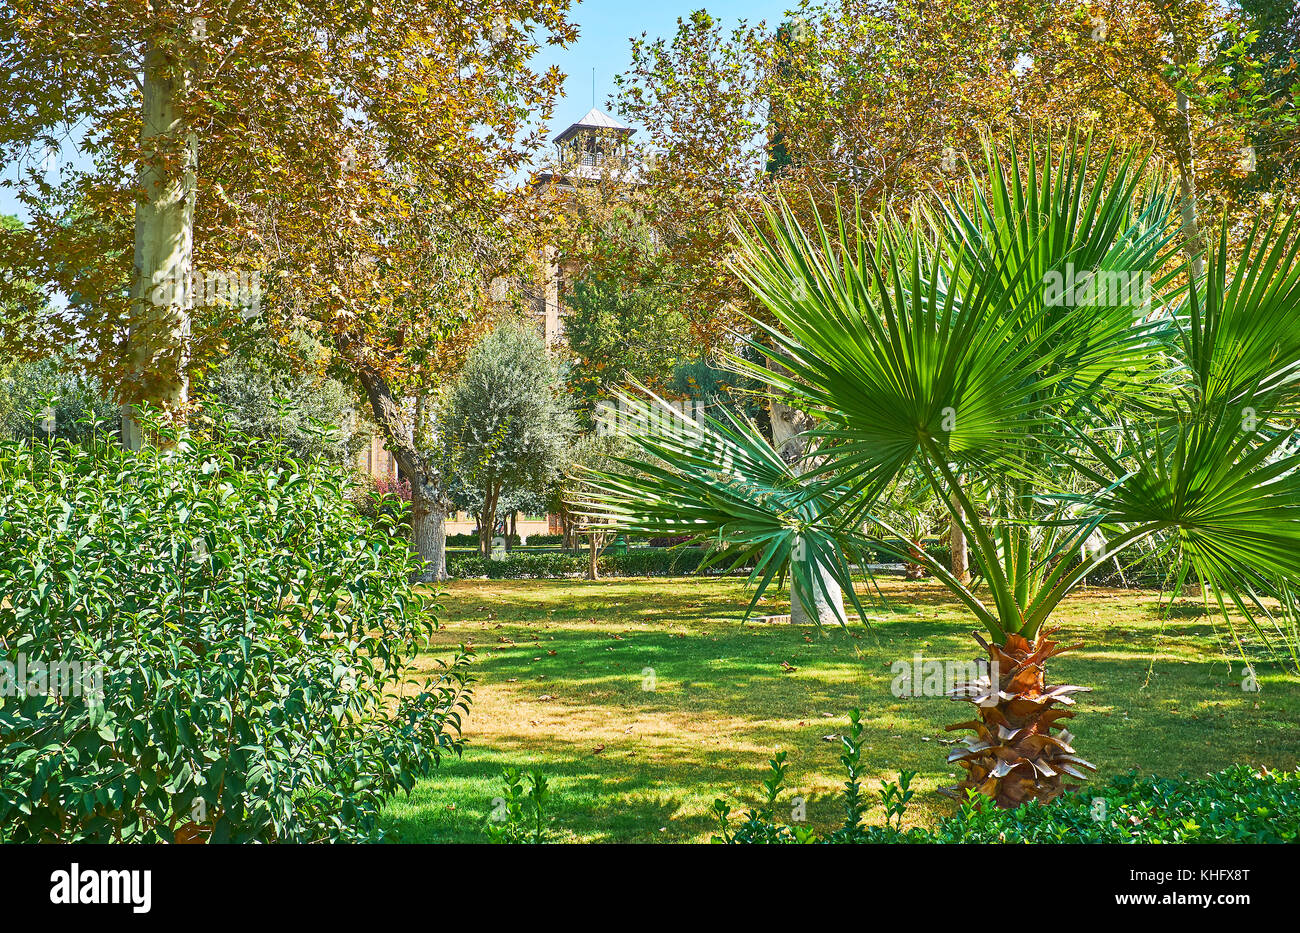 Golestan complex boasts amazing garden, the perfect place to relax and enjoy the nature, Tehran, Iran. Stock Photo